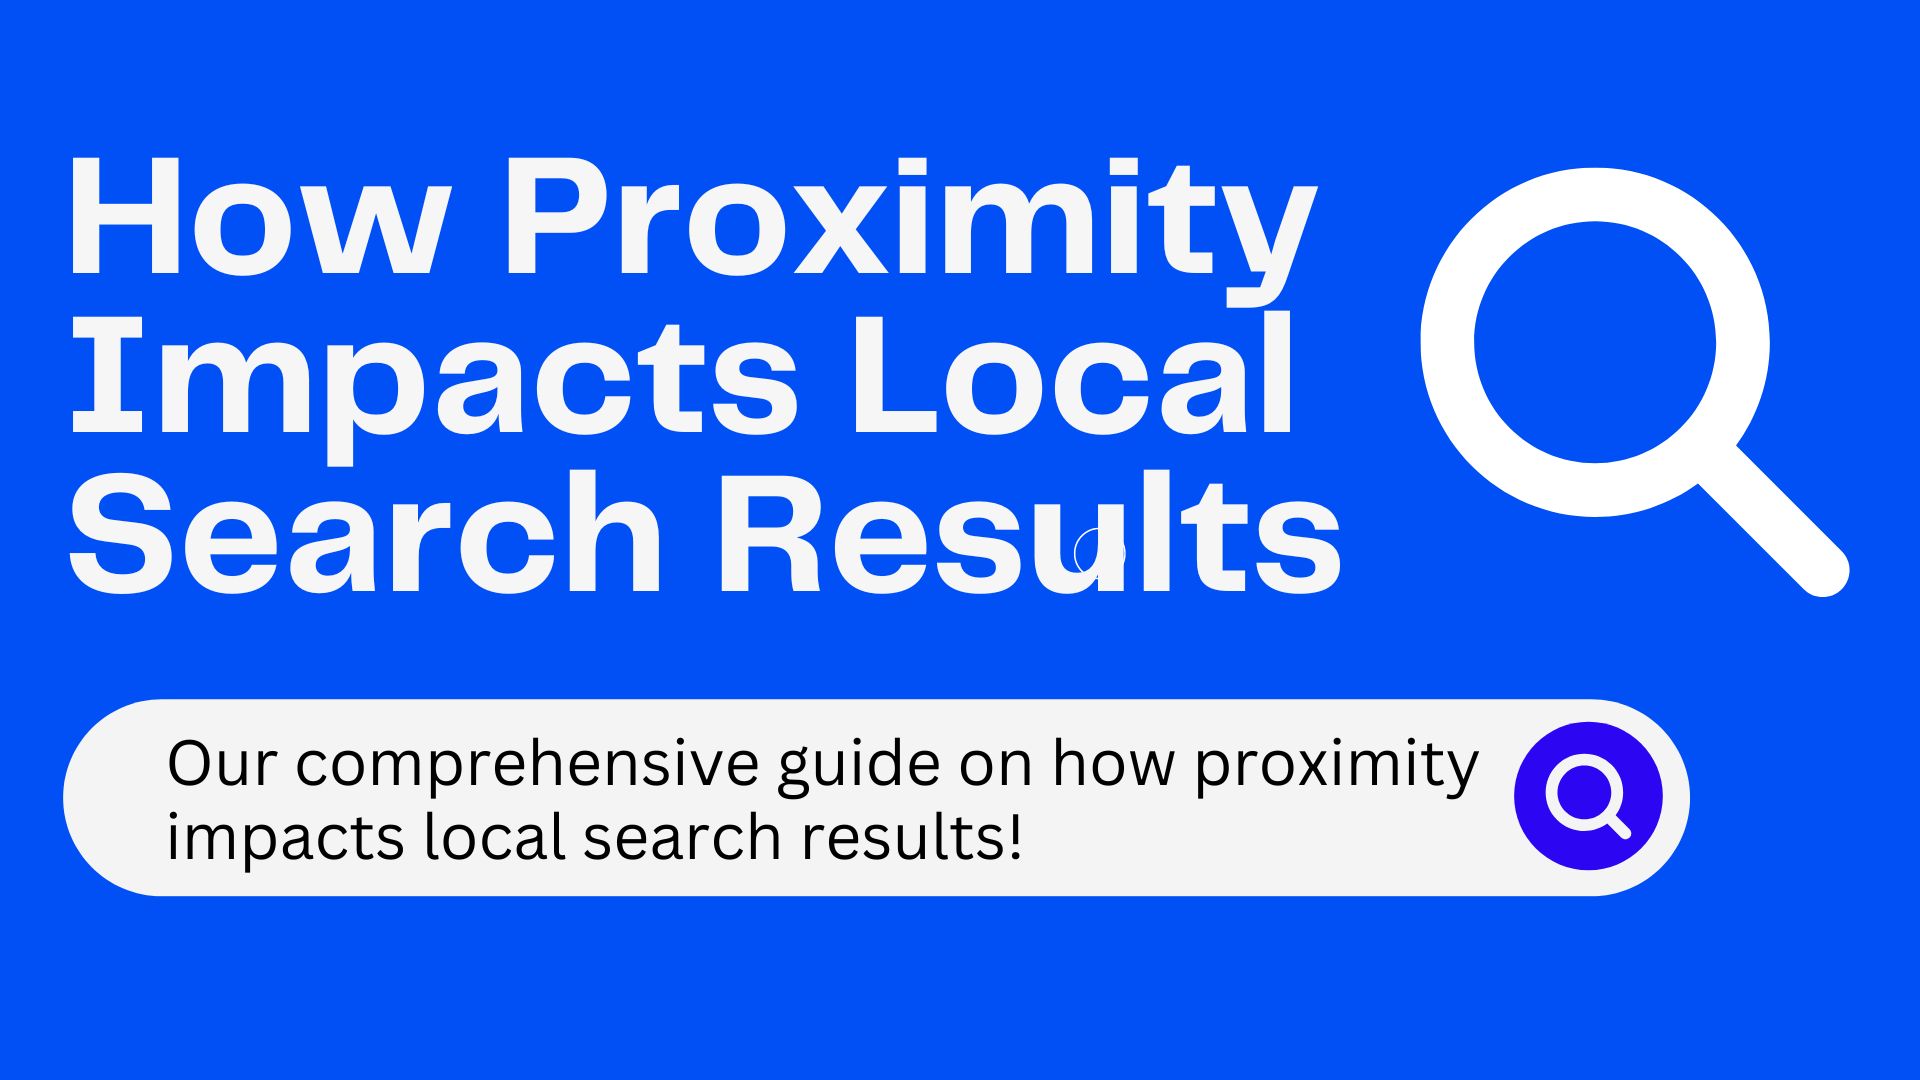 How Proximity Impacts Local Search Results